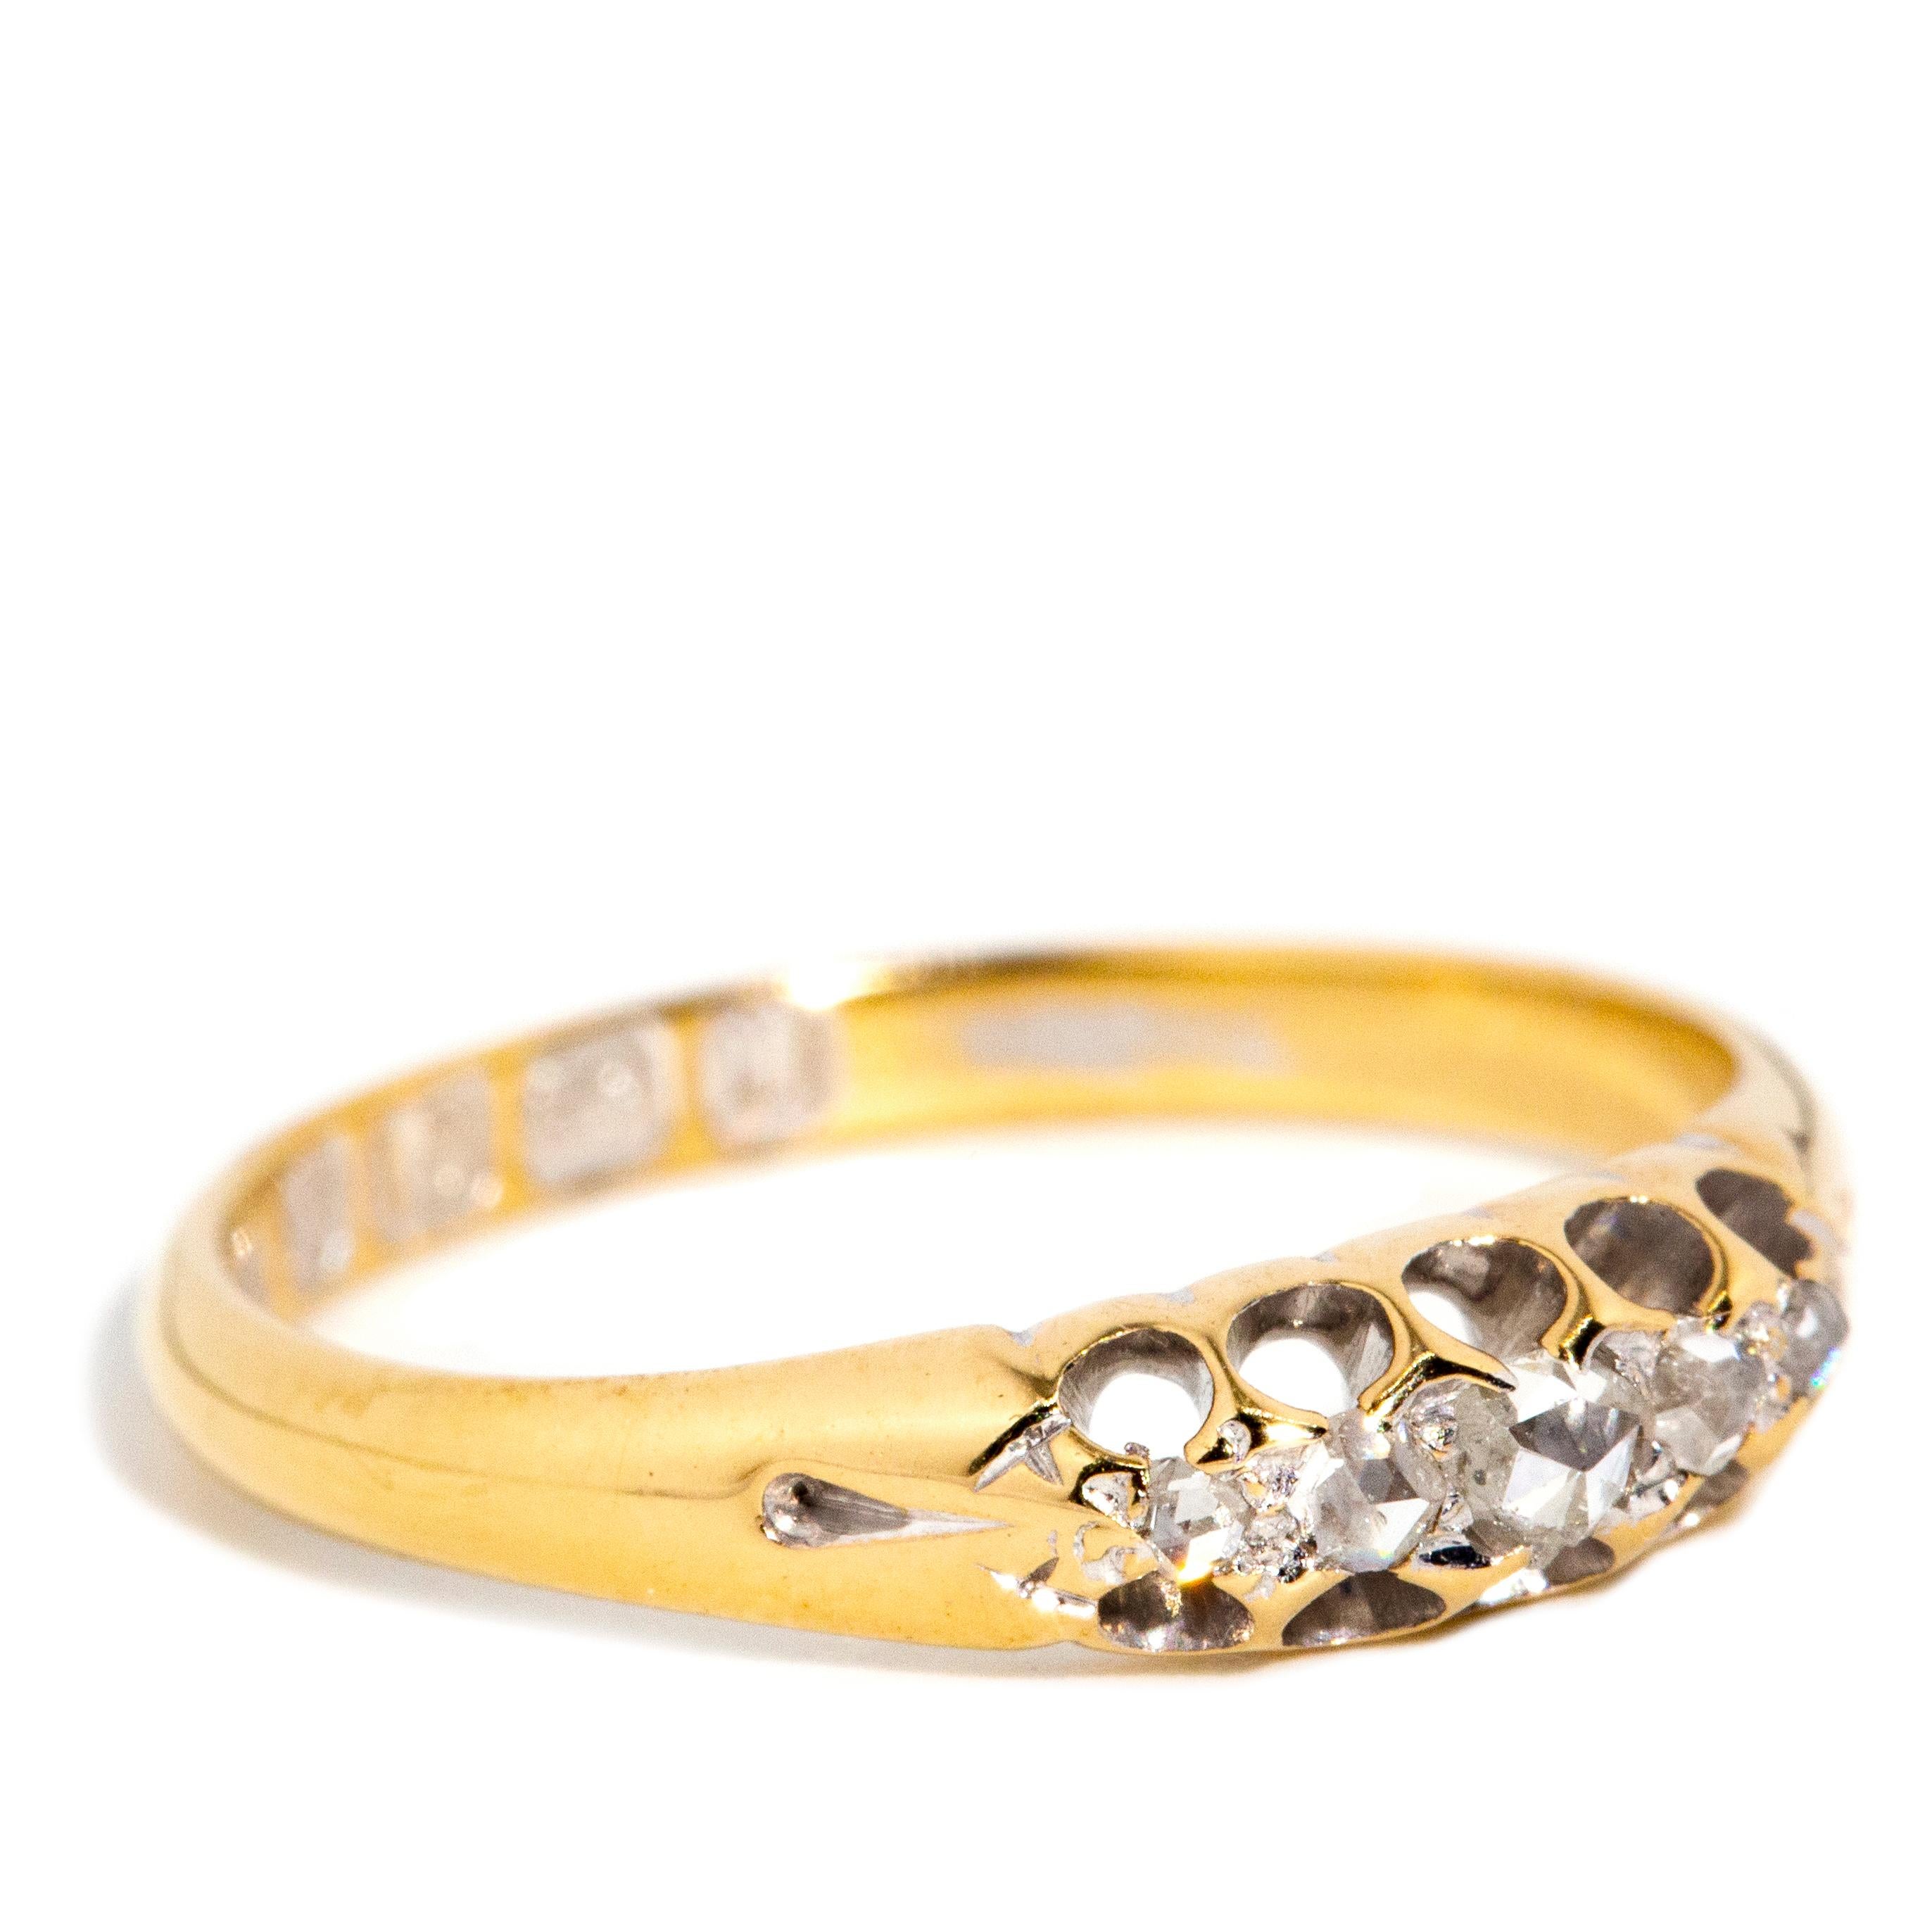 Late Victorian Antique Victorian Era 1891 Rose Cut Diamond Five Stone Ring 18 Carat Yellow Gold For Sale